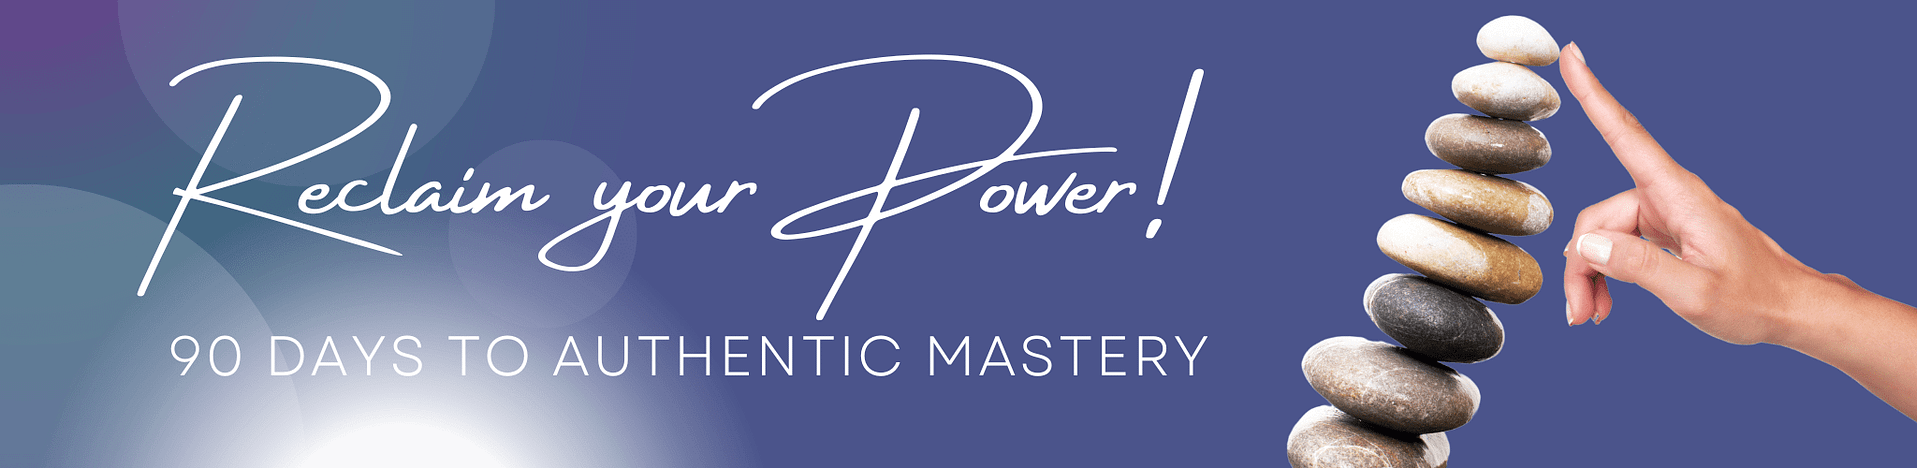 Reclaim your Power! 90 days to authentic mastery